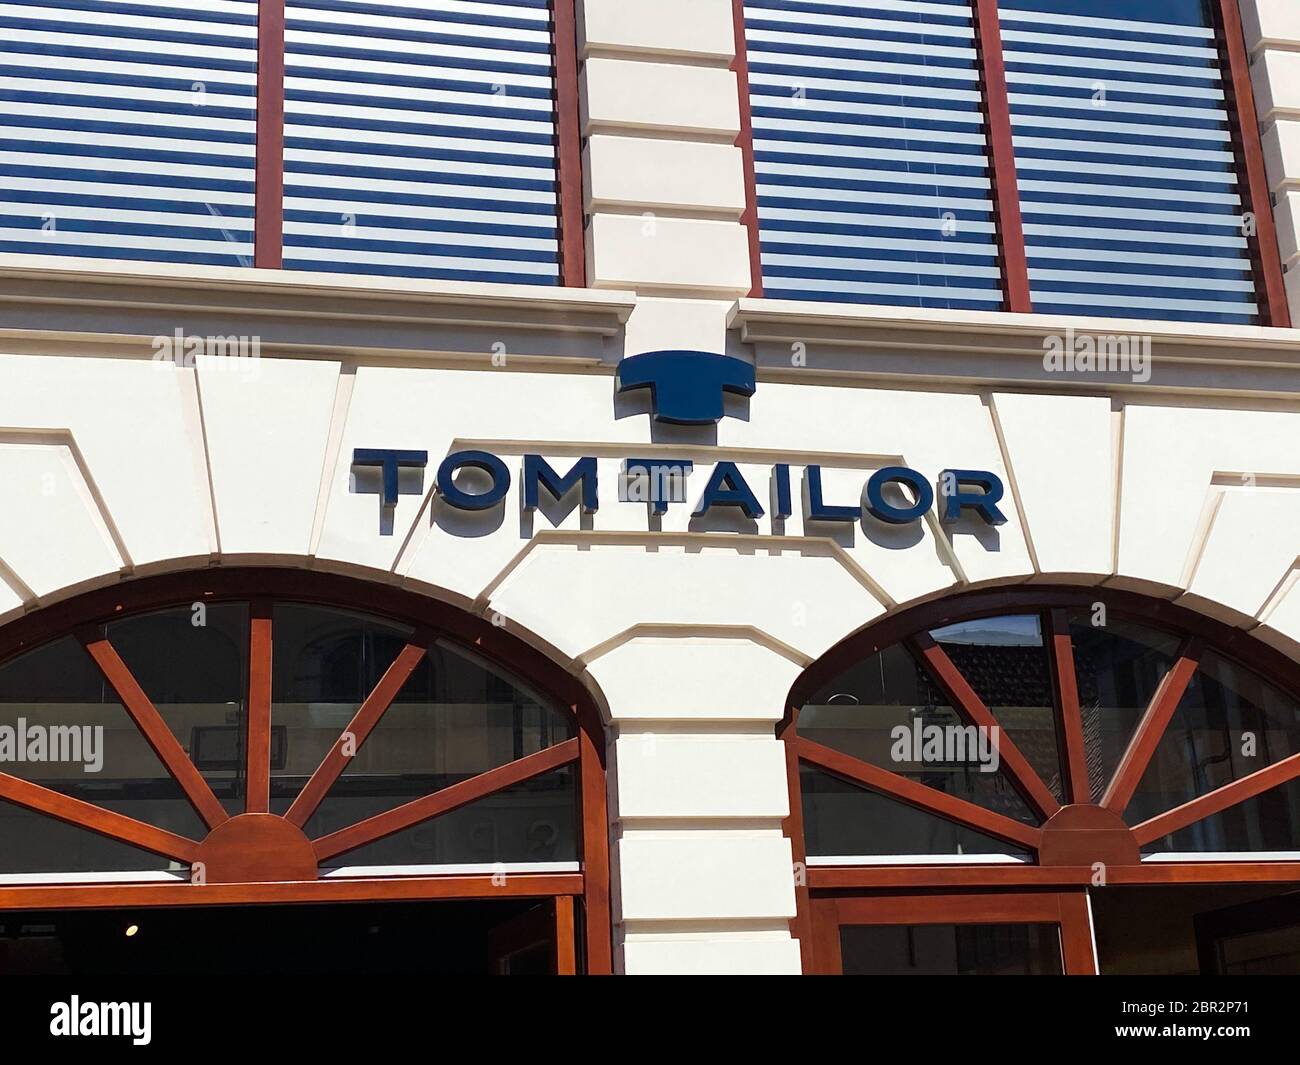 - Alamy tailor Tom hi-res images logo stock photography and